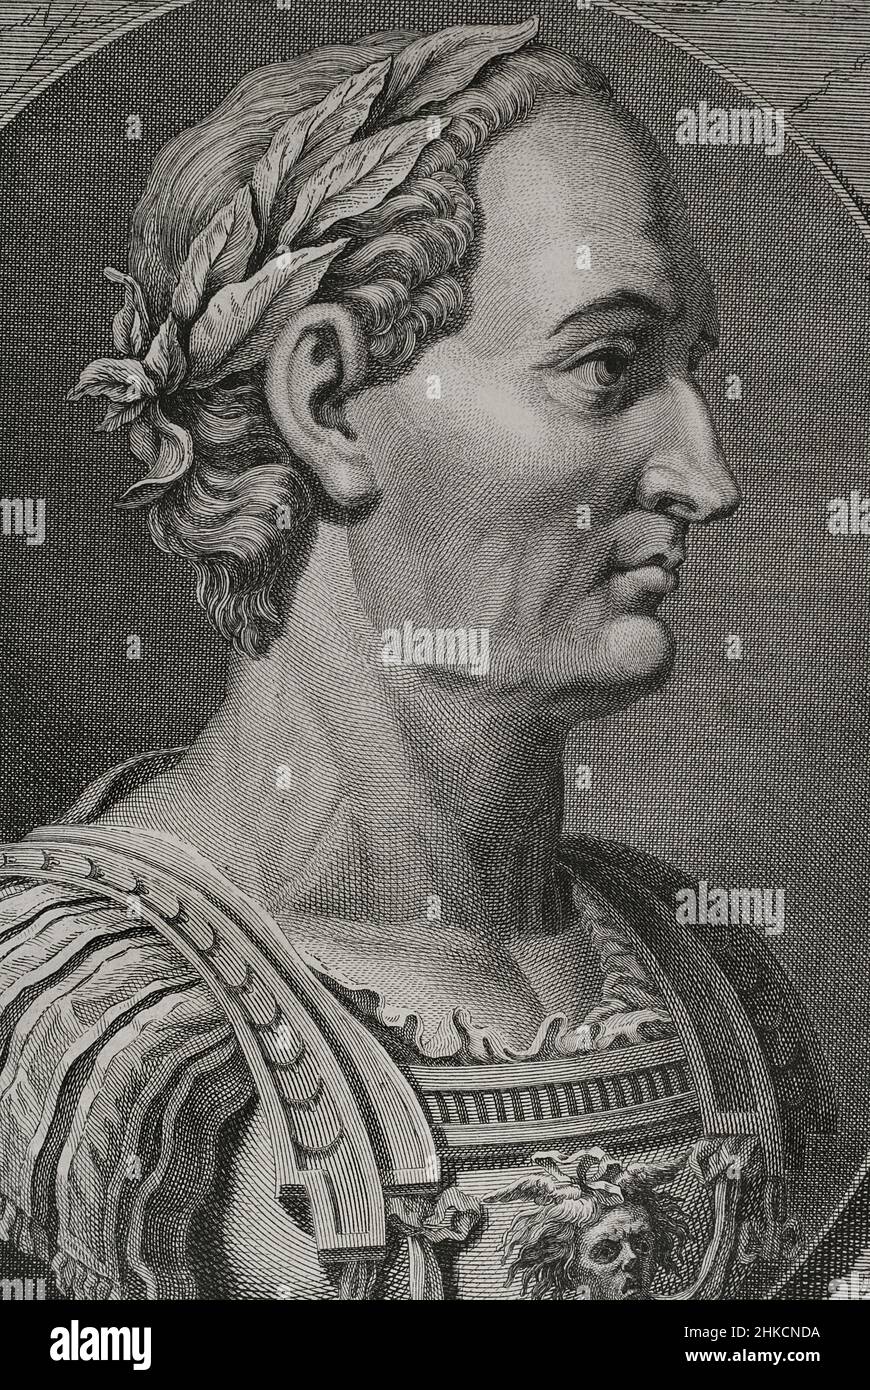 Gaius Julius Caesar (100 BC - 44 BC). Roman politician, general and writer. In 60 BC he established a triumvirate with Pompey and Crassus. Conquered Gaul. Head of the empire an dictator in perpetuity (Dictator Perpetuus). Portrait. Engraving. 'Commentaires de Cesar, avec des notes historiques, critiques et militaires, by count Turpin de Crissé. Volume I. Published in Montargis and sold in Paris, 1785. Stock Photo